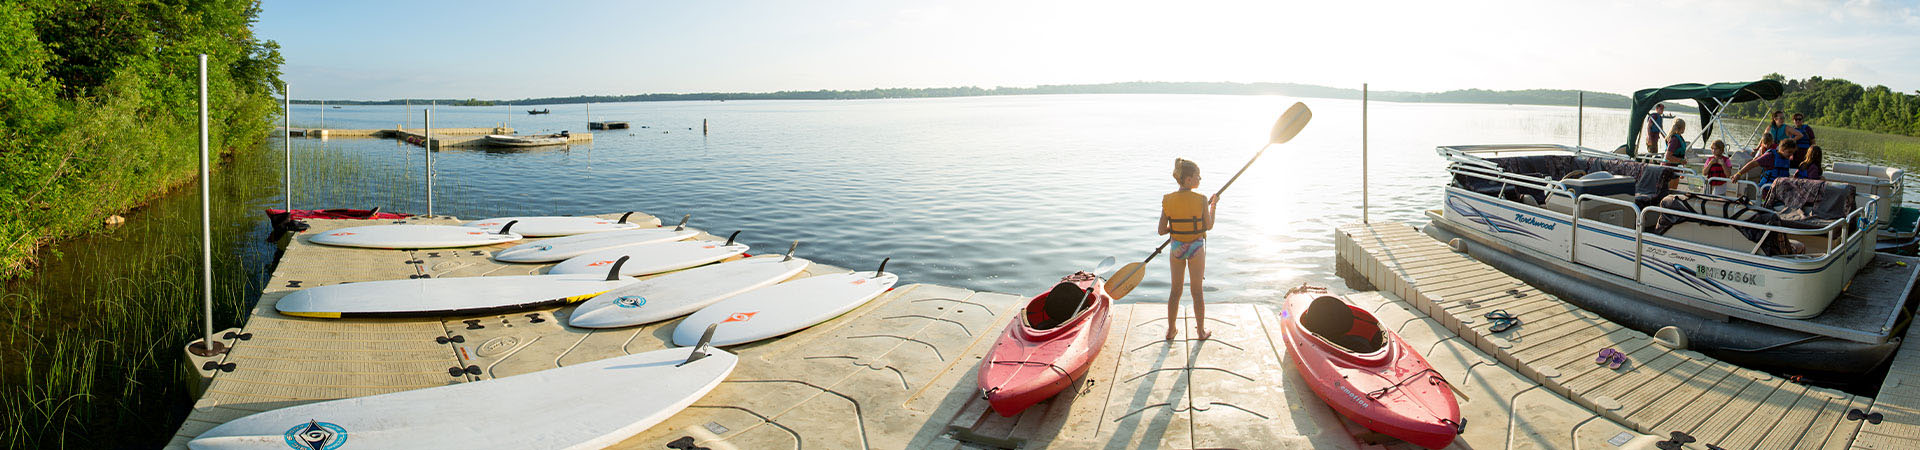  Girl standing next to kayak looking out at water 